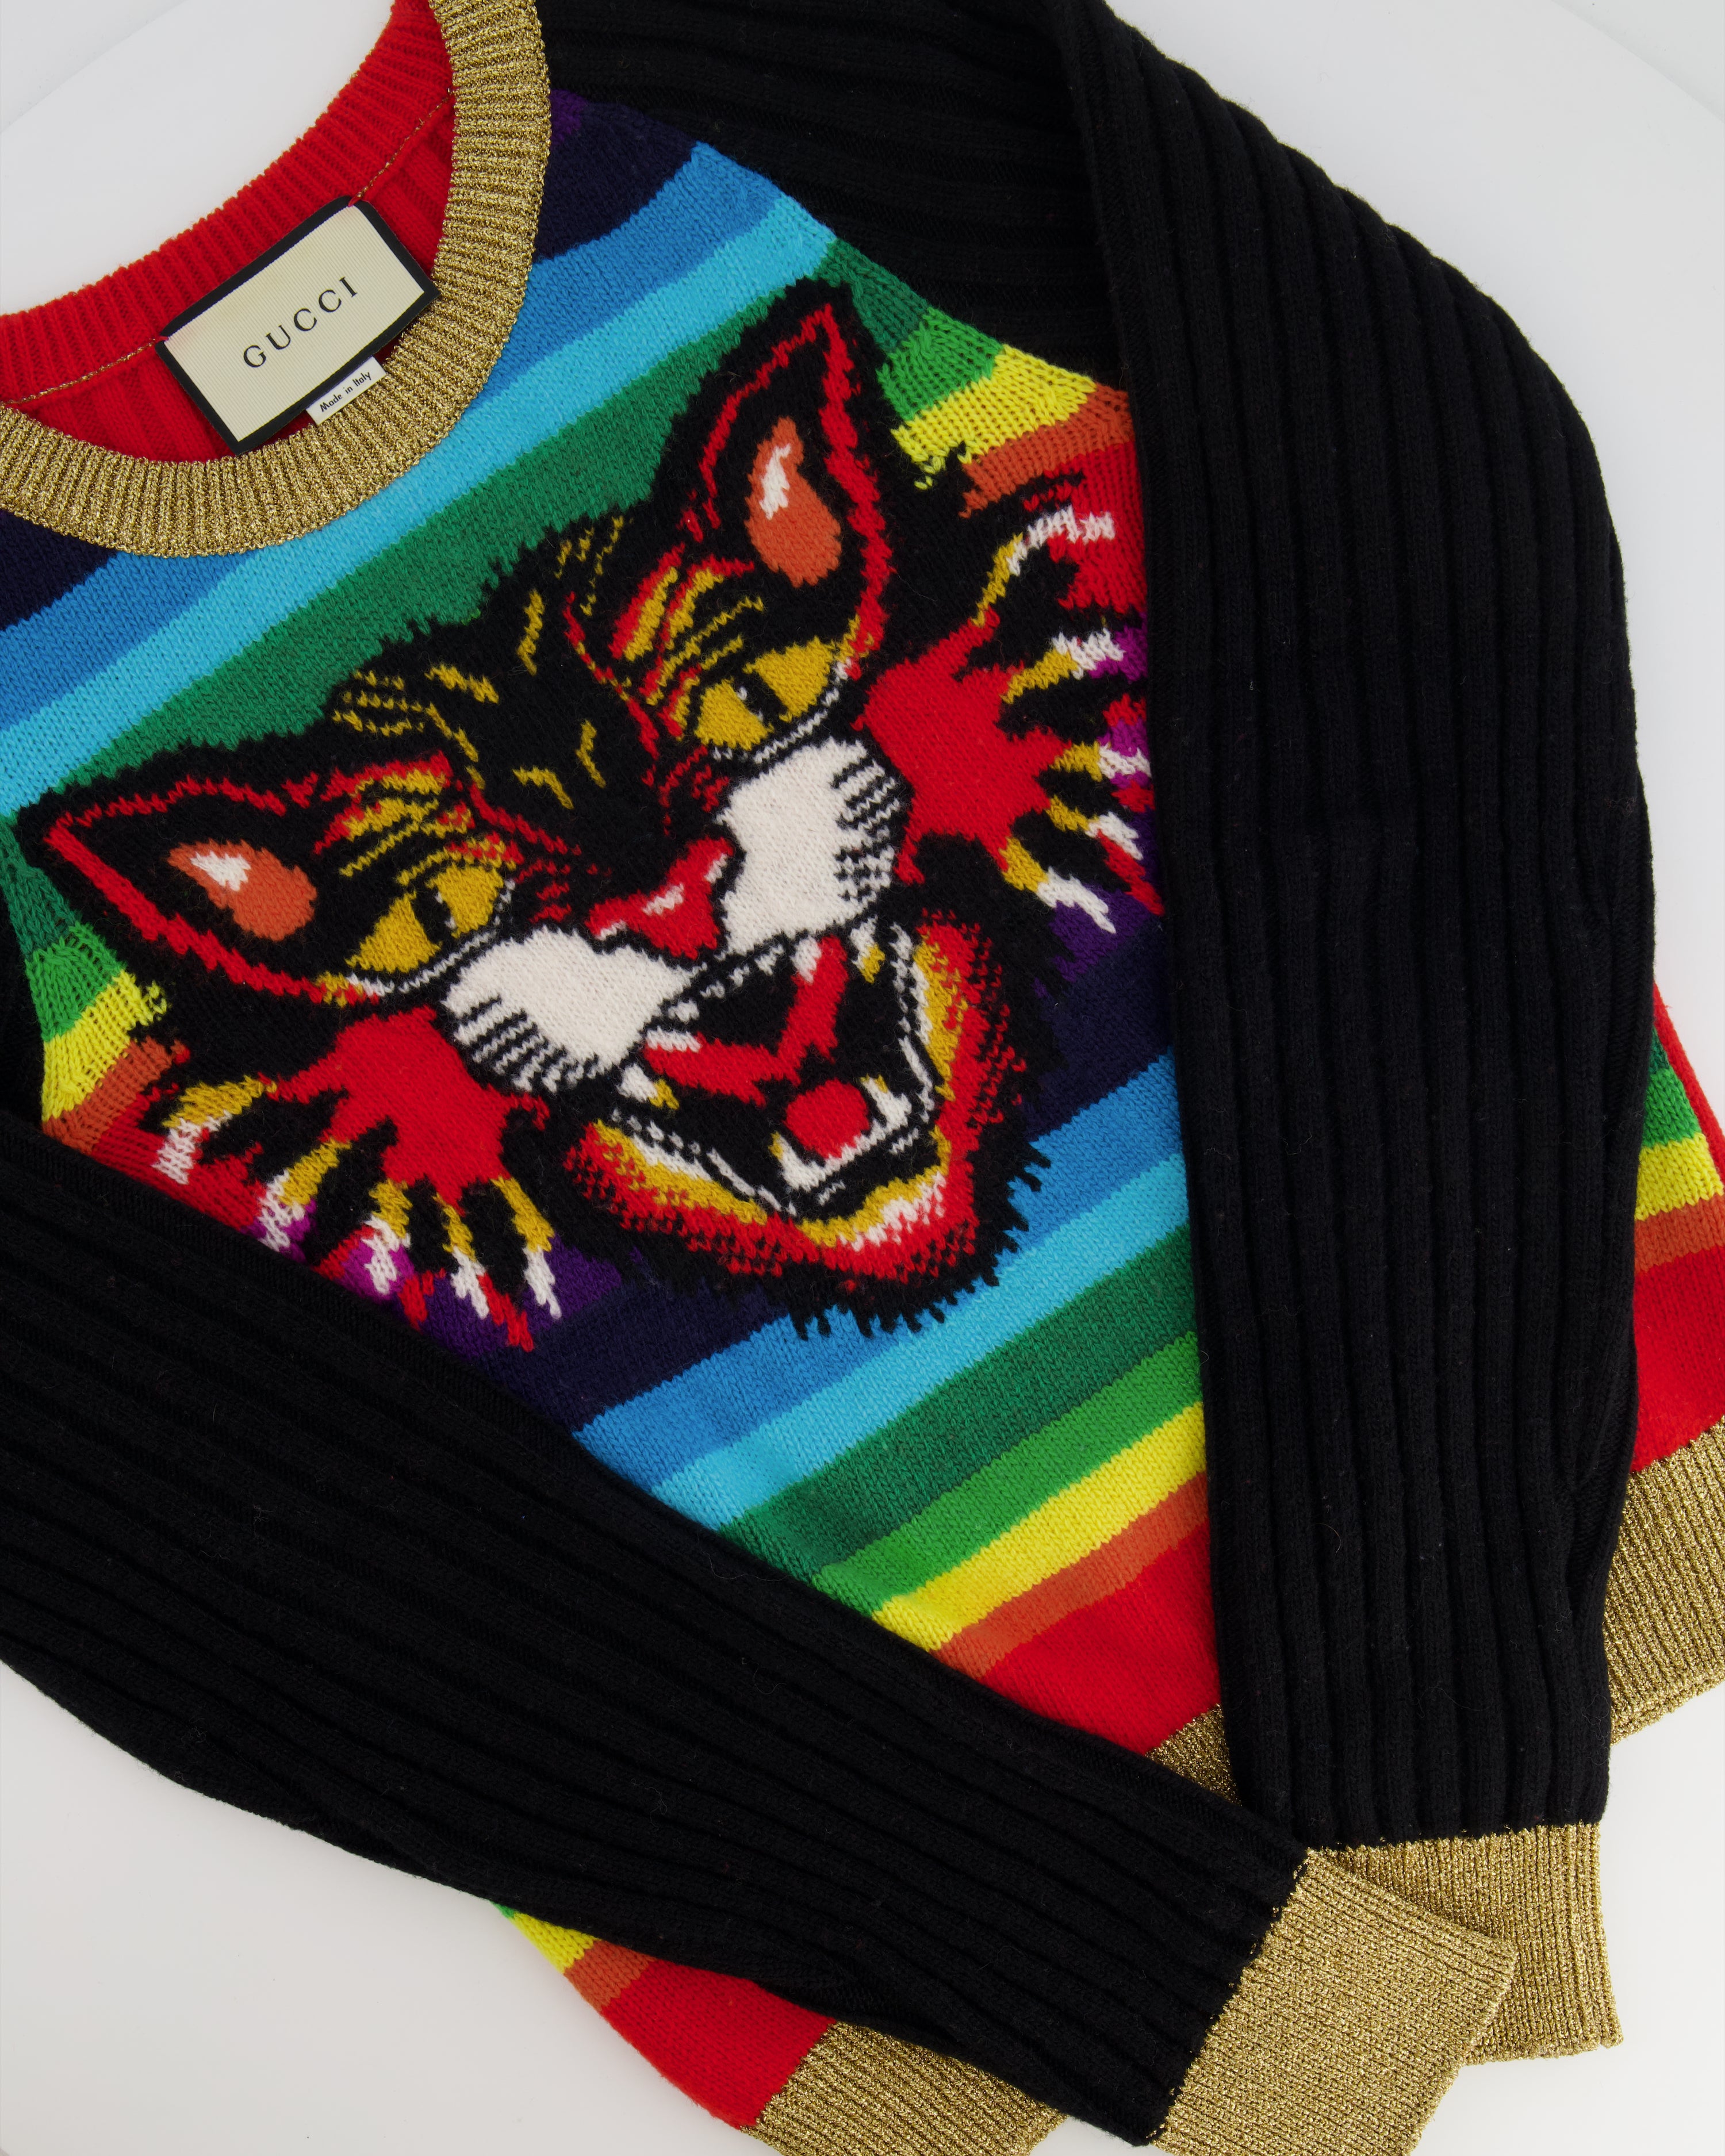 Gucci Authenticated Knitwear